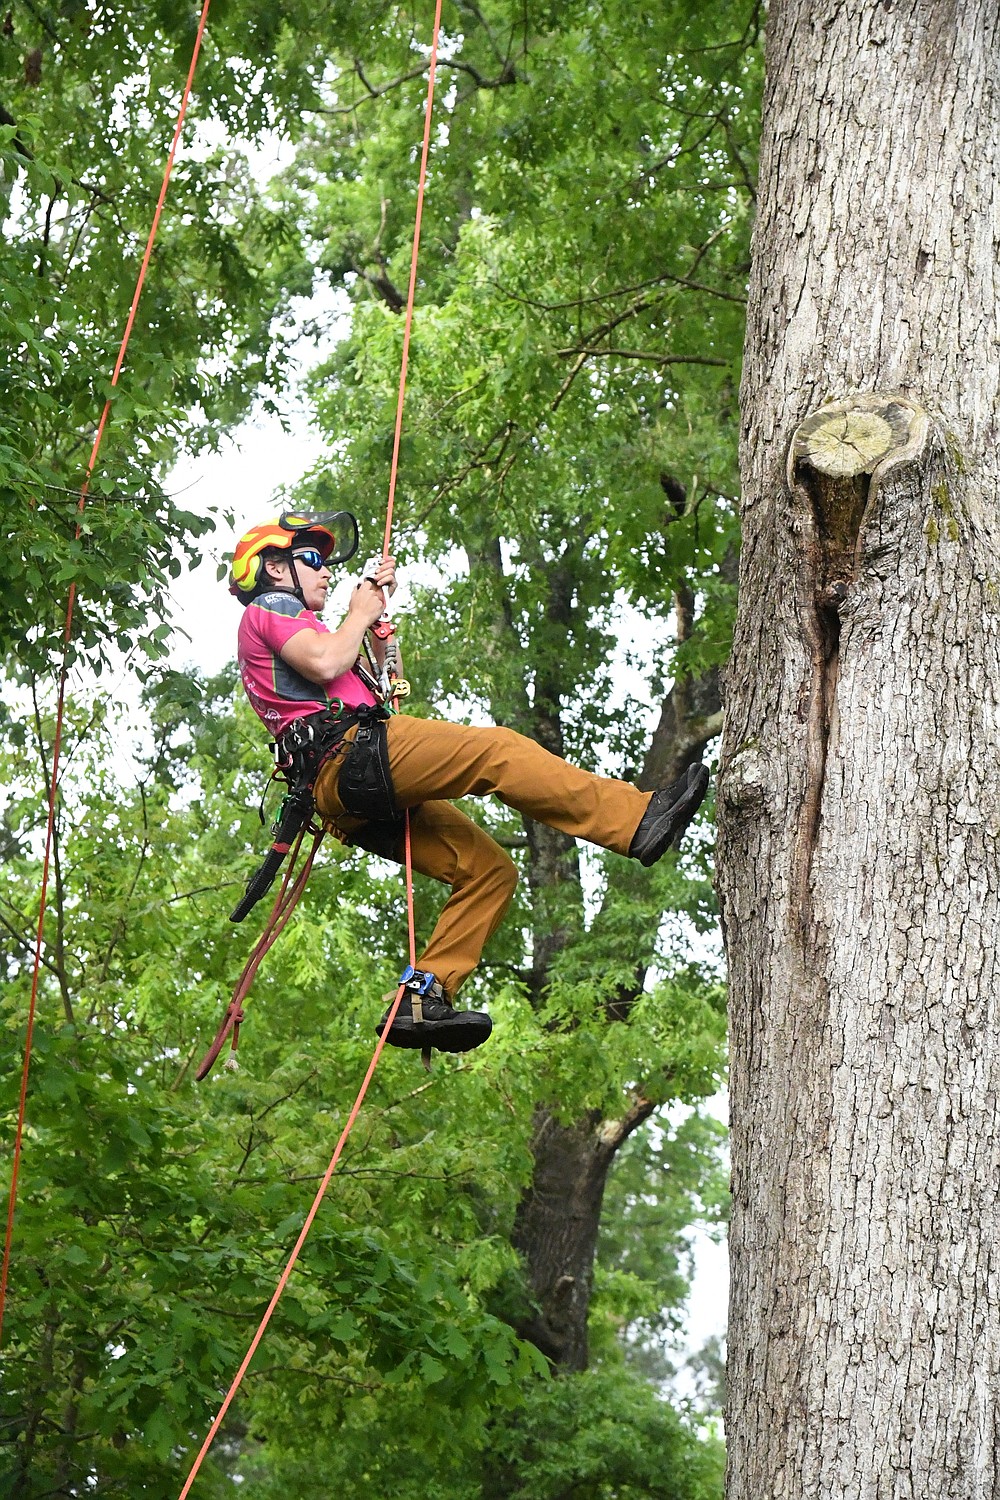 WATCH Arborists from across U.S. compete, learn at climbing event